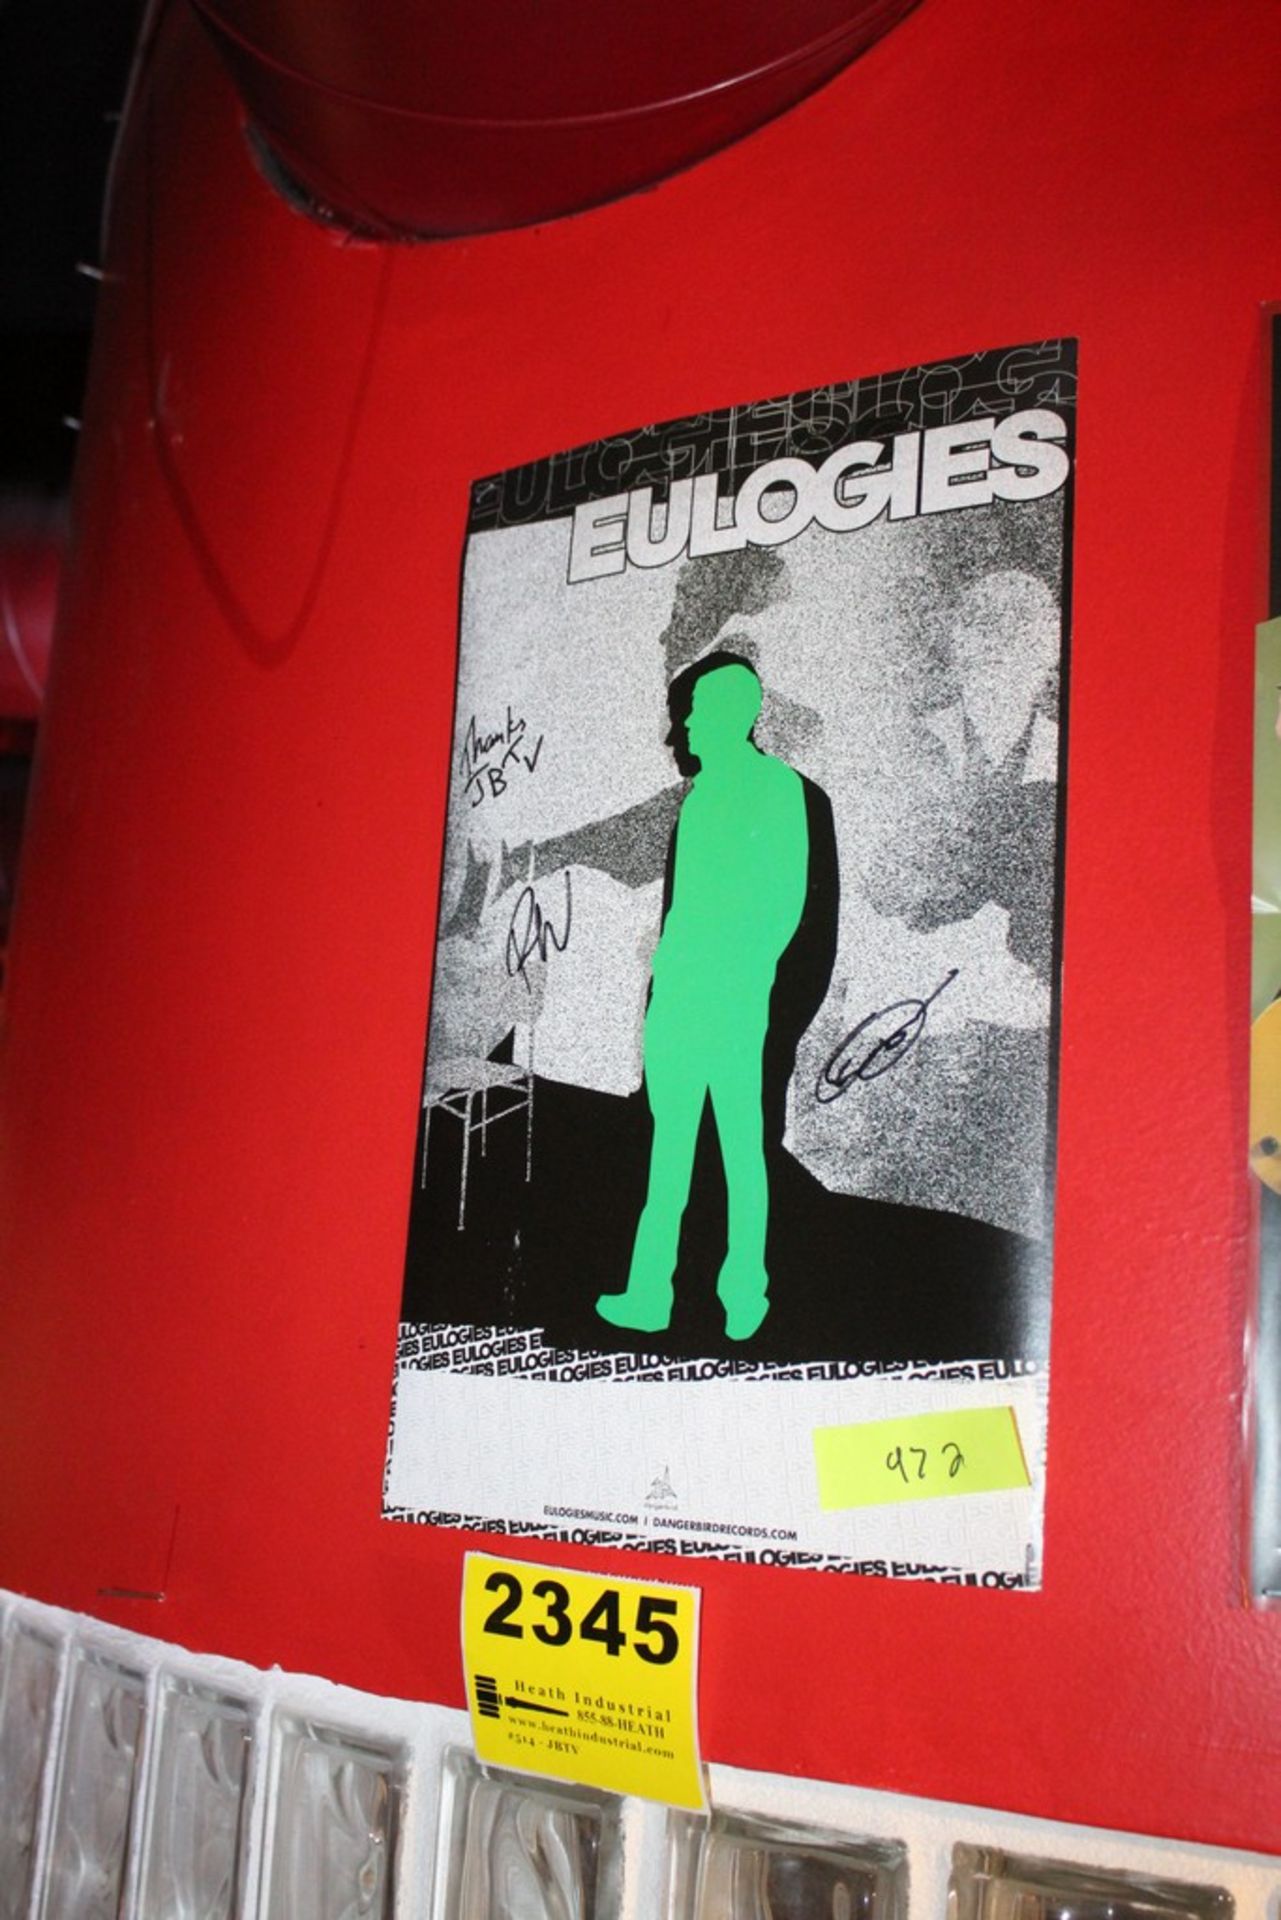 Eulogies-Signed Poster